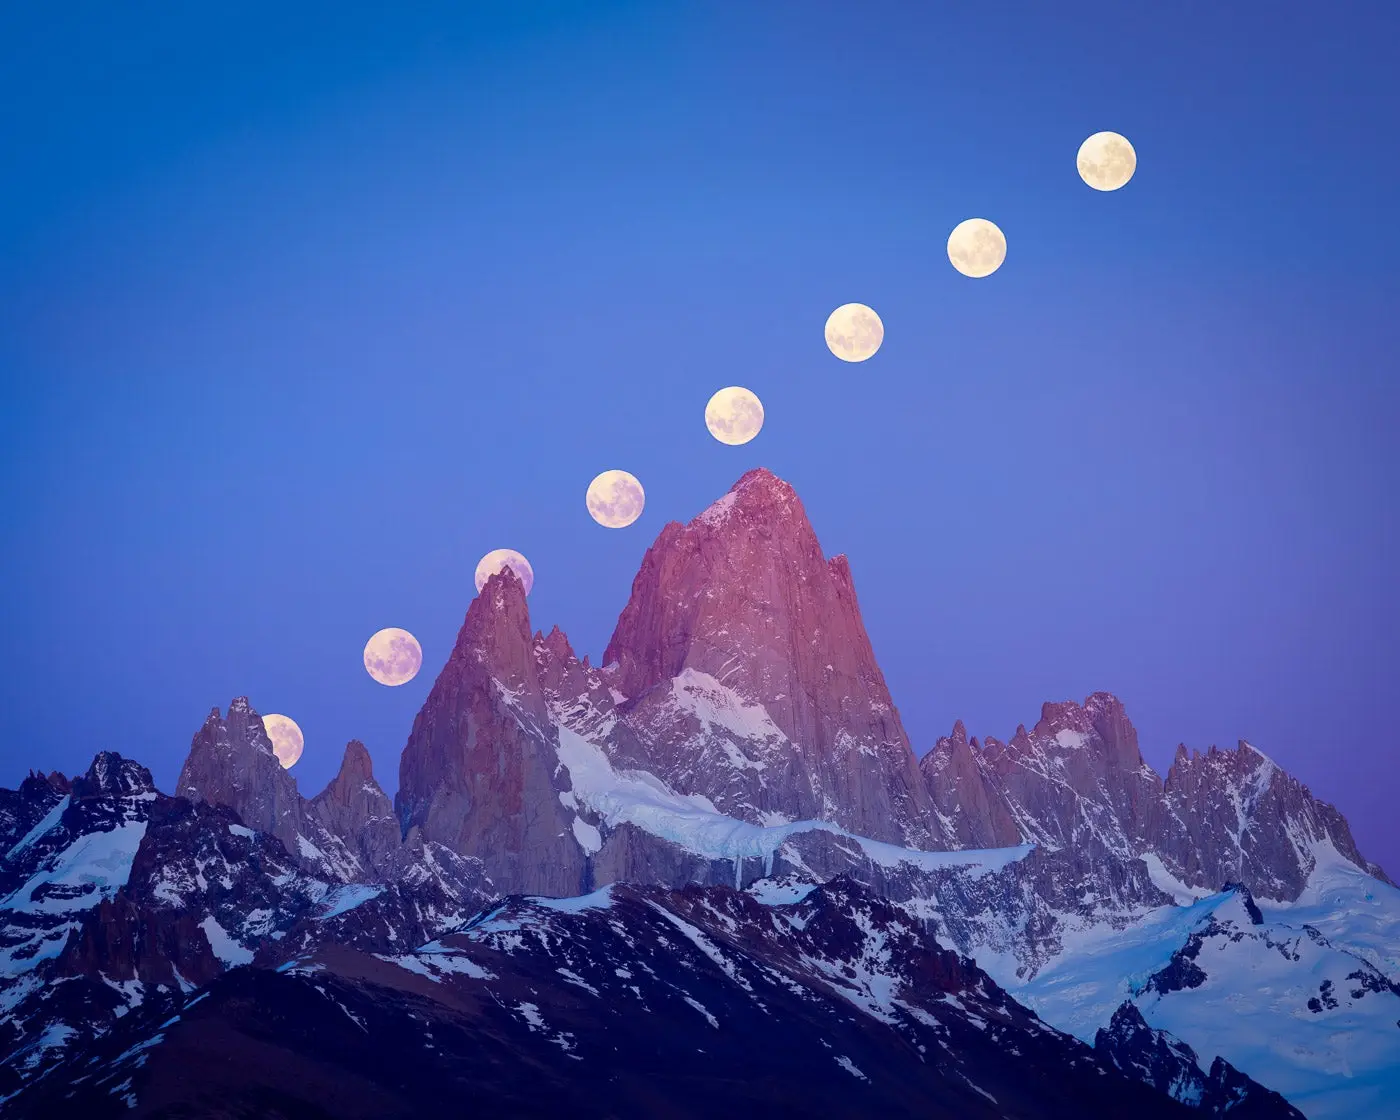 Photo showing different phases of the moon during the night moving over the mountains.